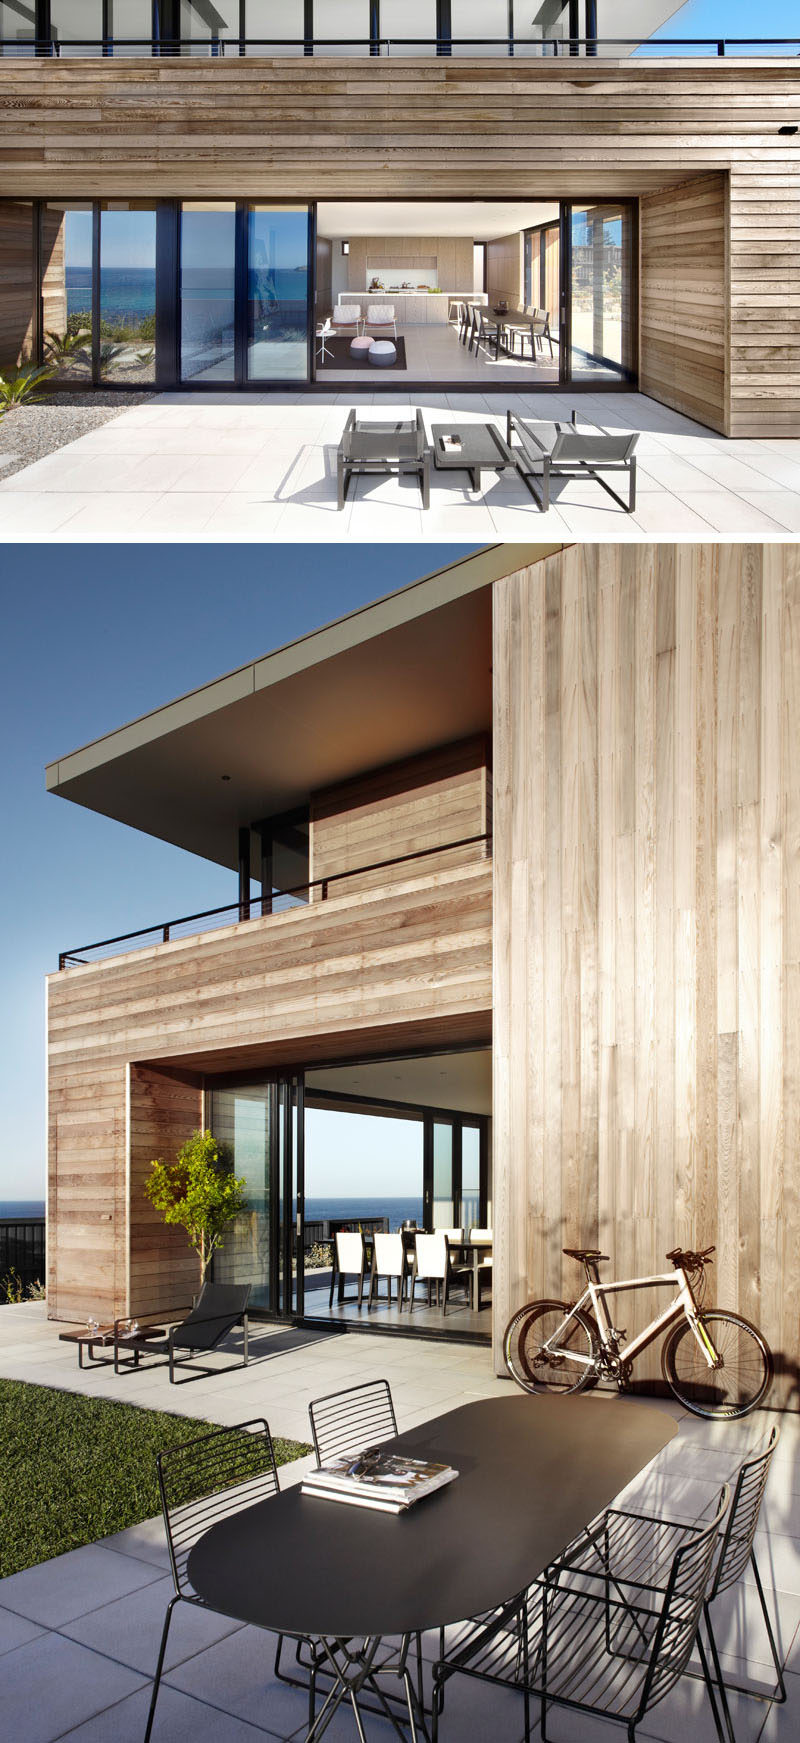 The rooms in this modern beach house open to generous outdoor spaces, located on different sides of the house, ensuring protection from the ever changing and strong winds. #ModernHouse #BeachHouse